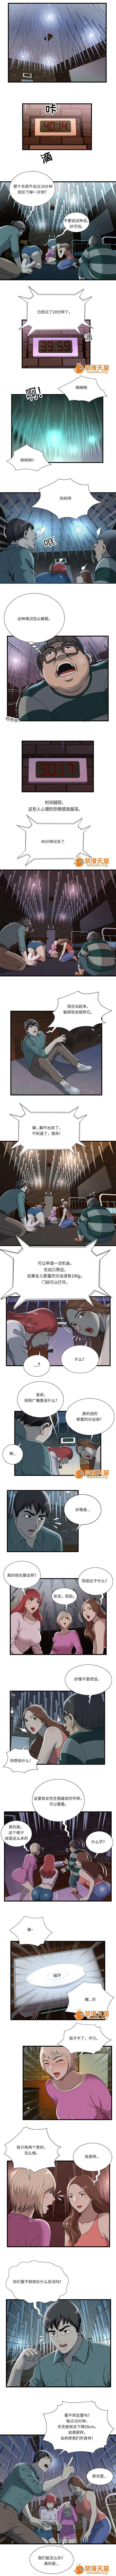 Doctor 脫逃遊戲 1-37 Hidden Camera - Page 7